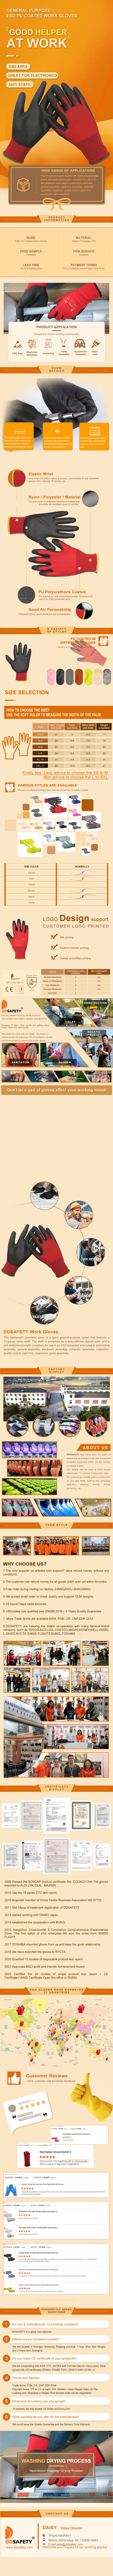 Safety Work Gloves PU Coated, Red Seamless Knit Glove-DPU138 Safety Work Gloves PU Coated, Red Seamless Knit Glove-DPU138 gloves,pu gloves,Safety Work Gloves,Safety Work Gloves PU Coated,Safety Work Gloves